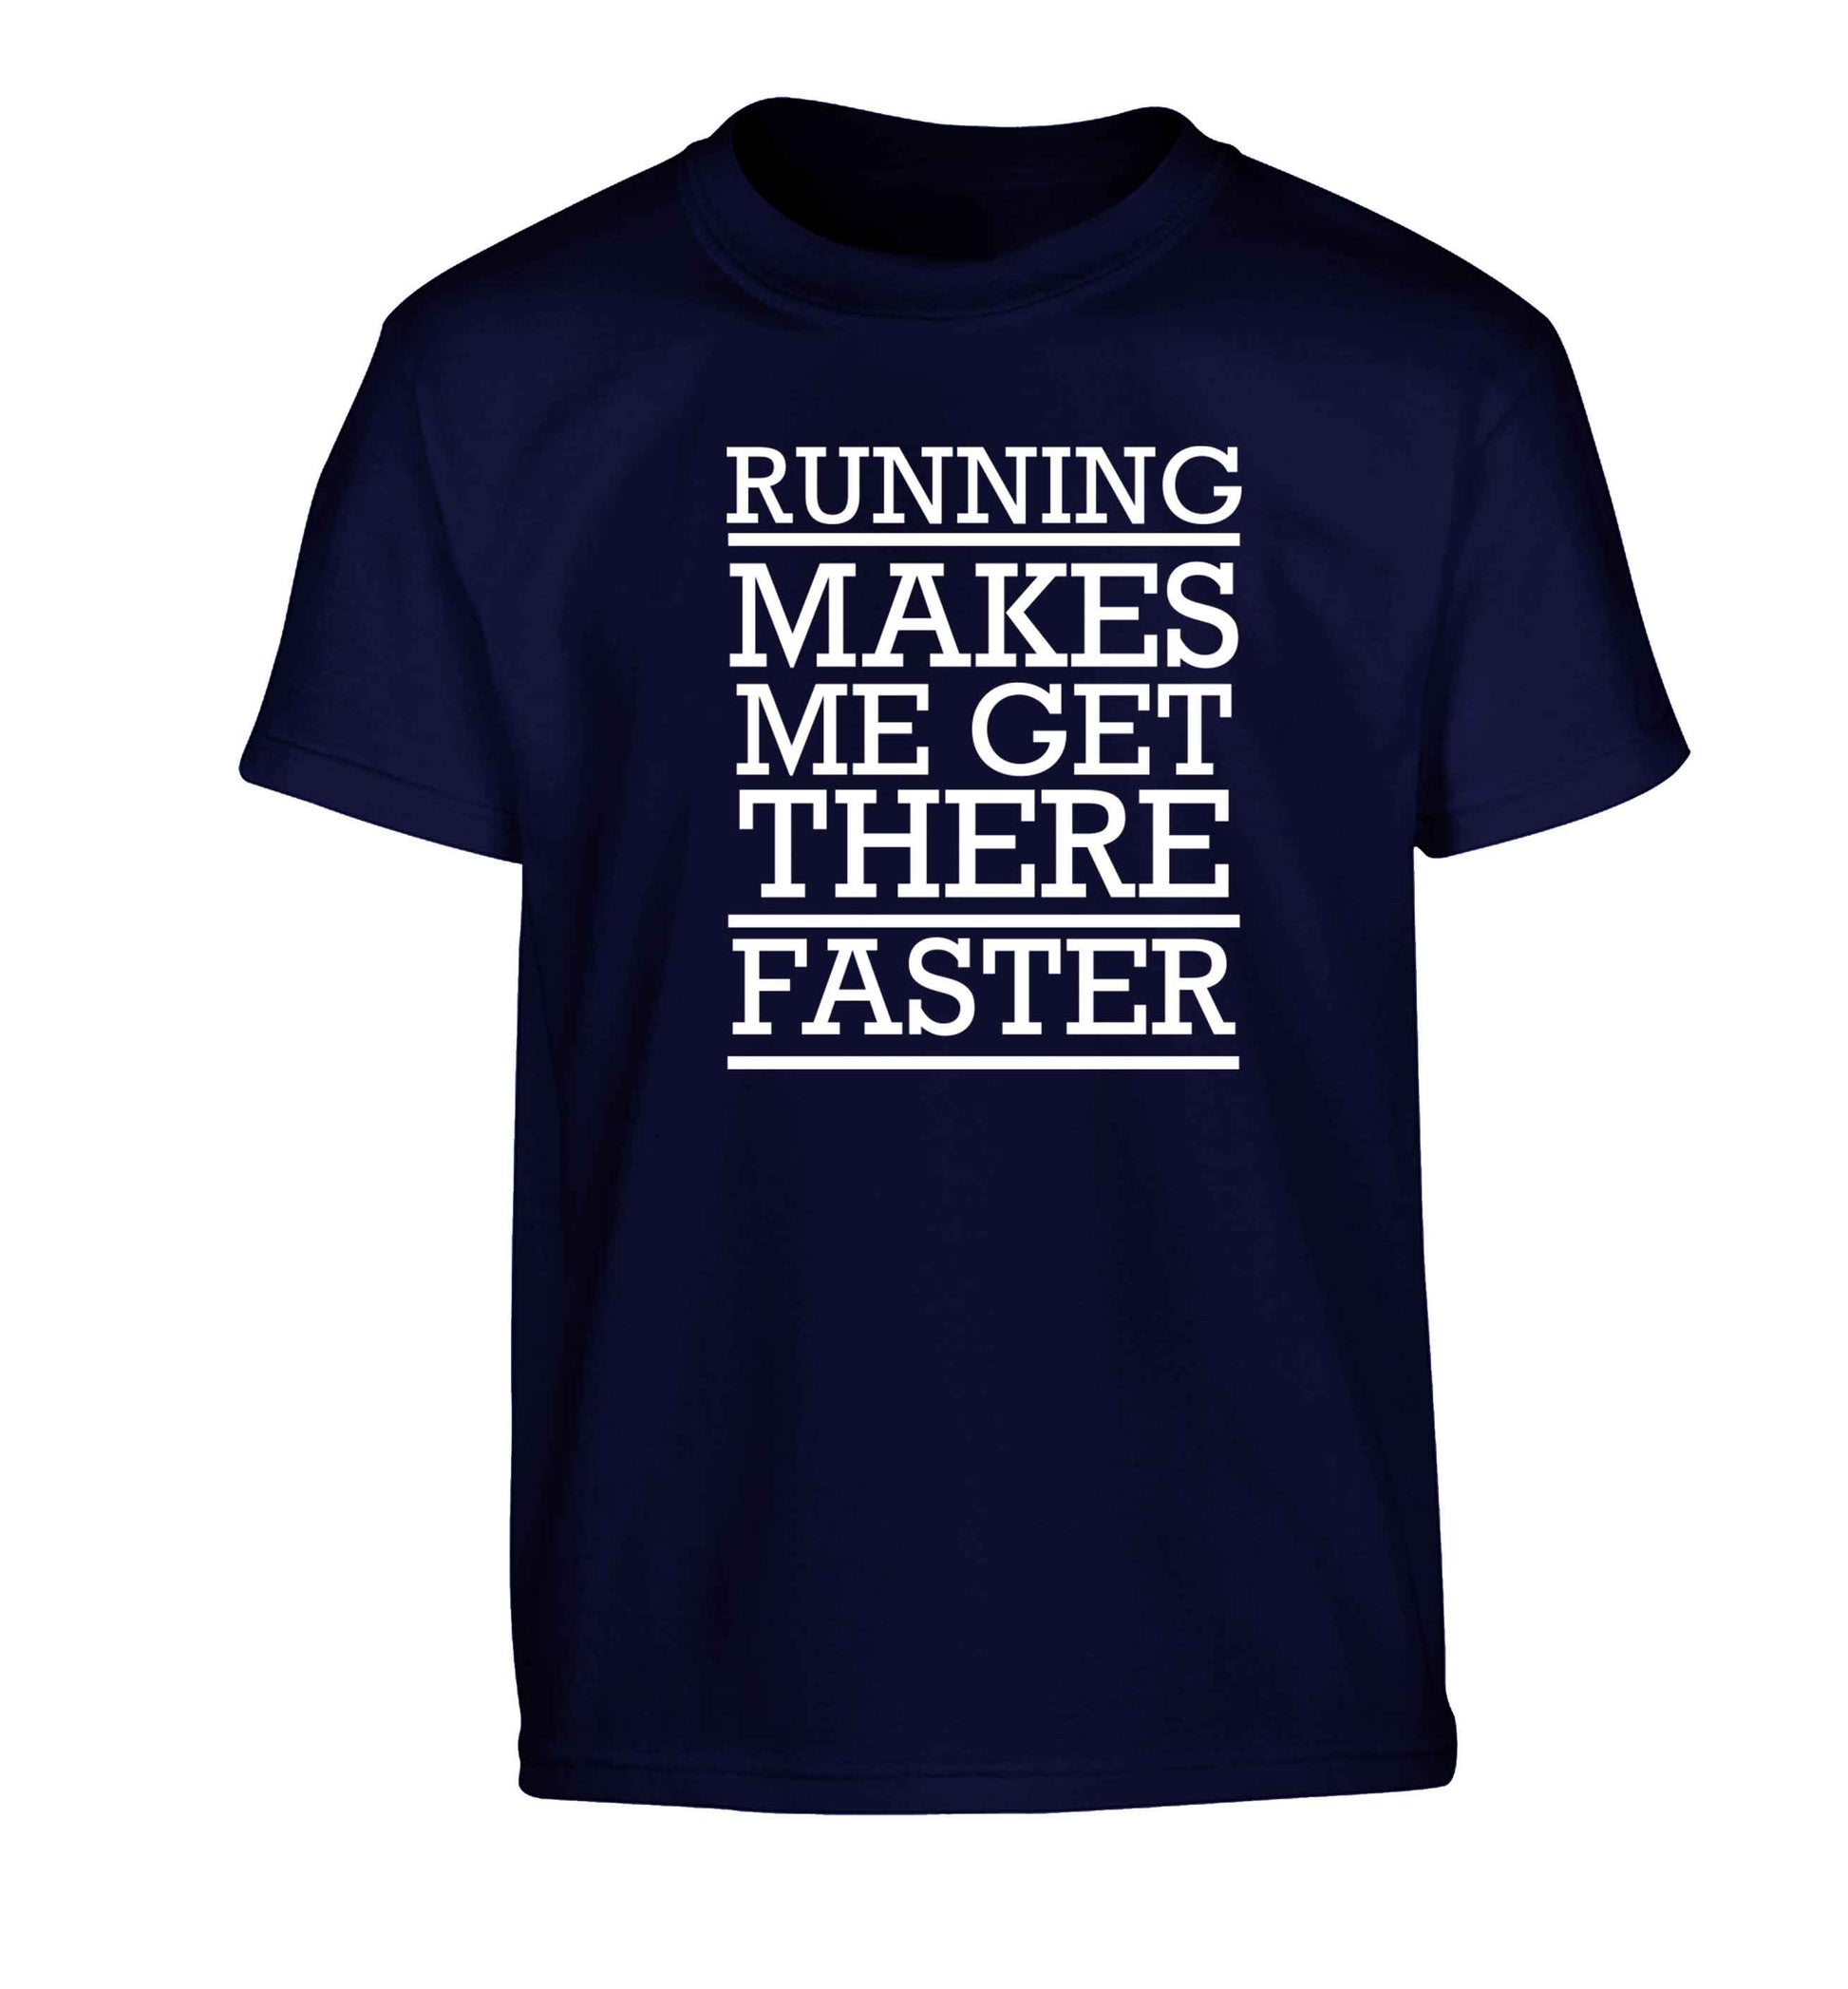 Running makes me get there faster Children's navy Tshirt 12-13 Years